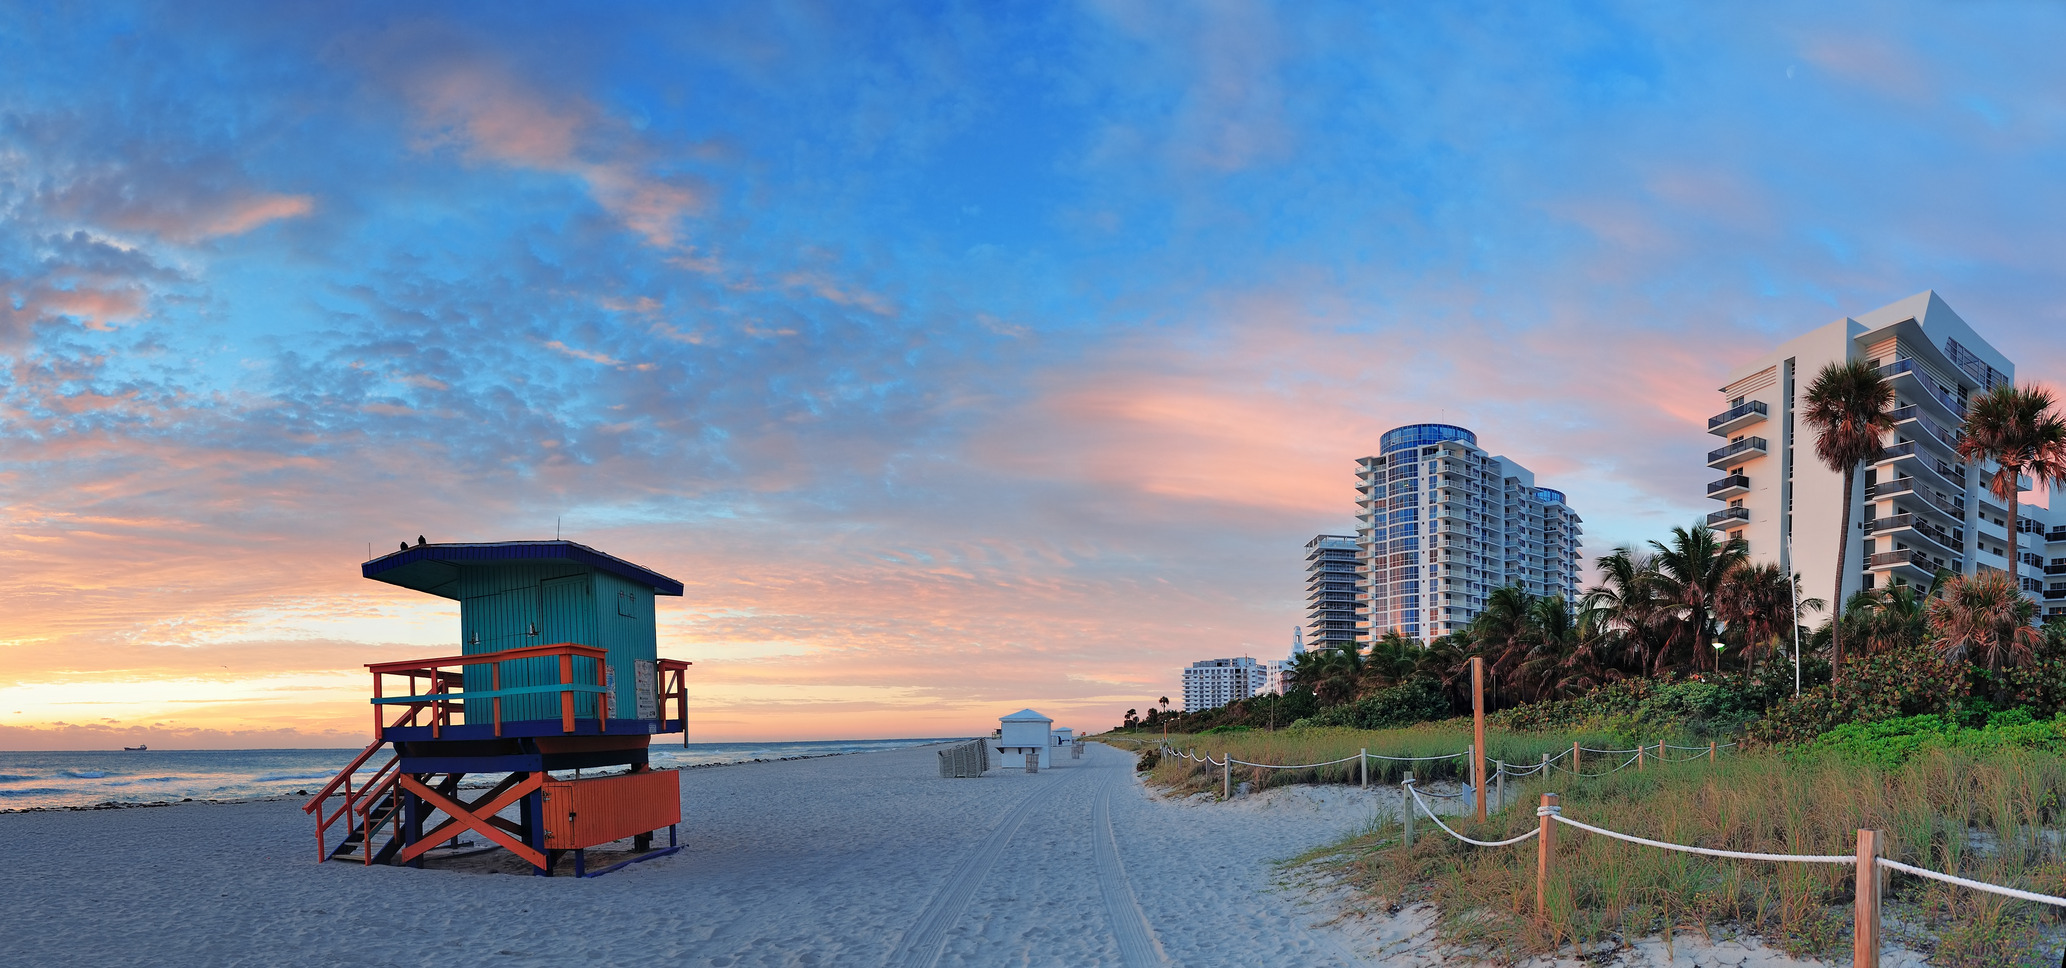 Miami South Beach sunrise with hotels and coastline with colorful cloud and blue sky.